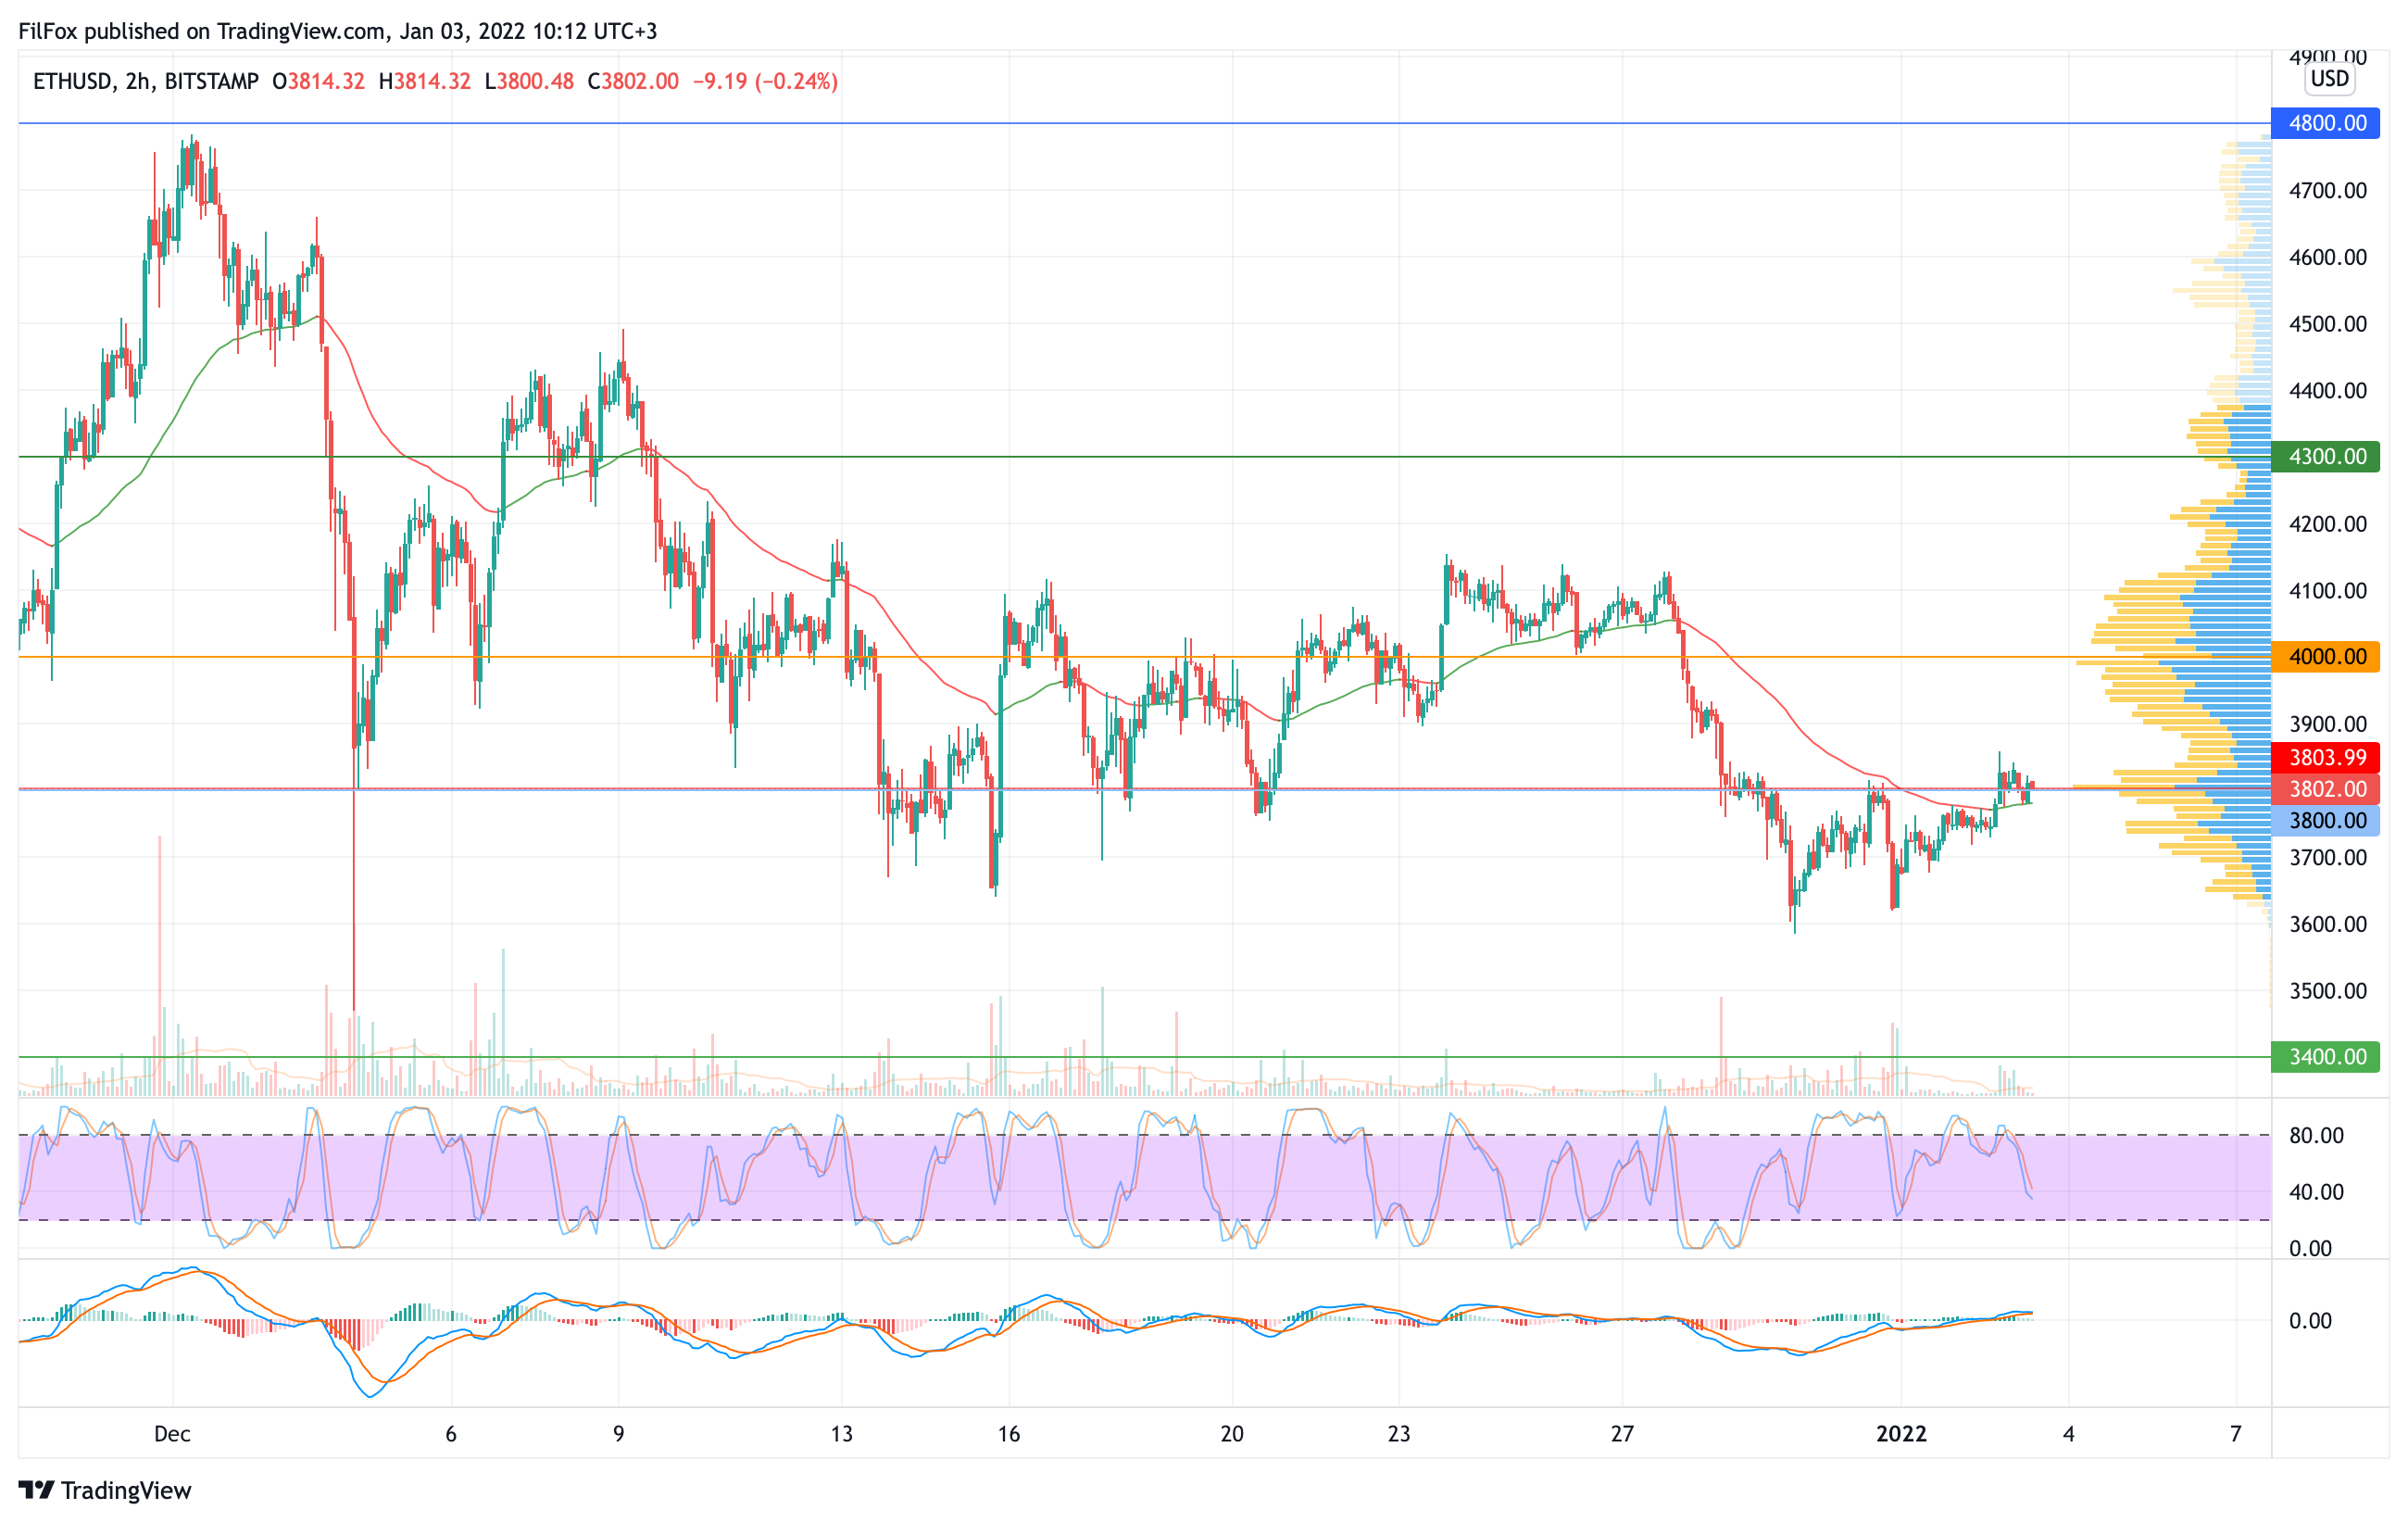 Analysis of the prices of Bitcoin, Ethereum, XRP for 01/03/2022